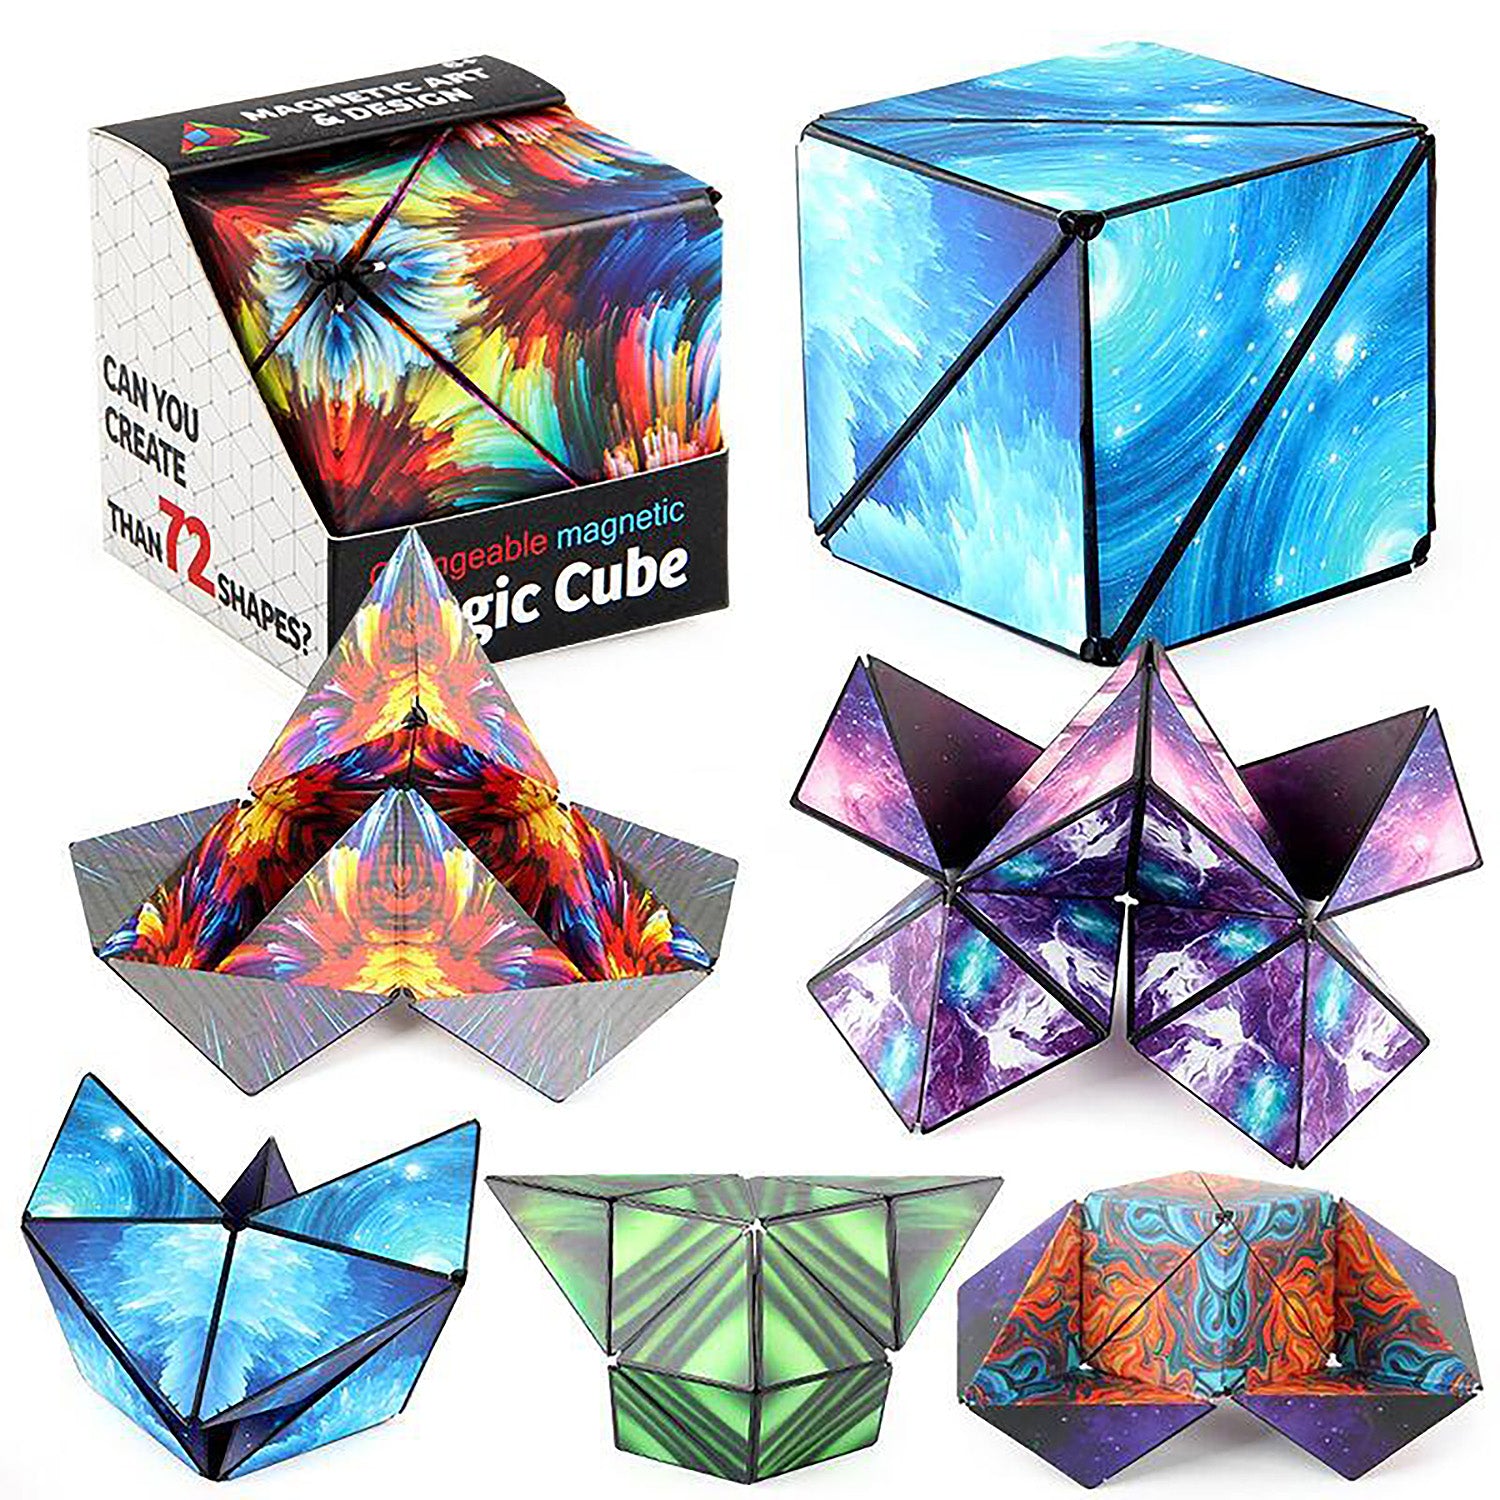 3D Changeable Magnetic Magic Cube, Shape Shifting Box Fidget Toy (Red Version)